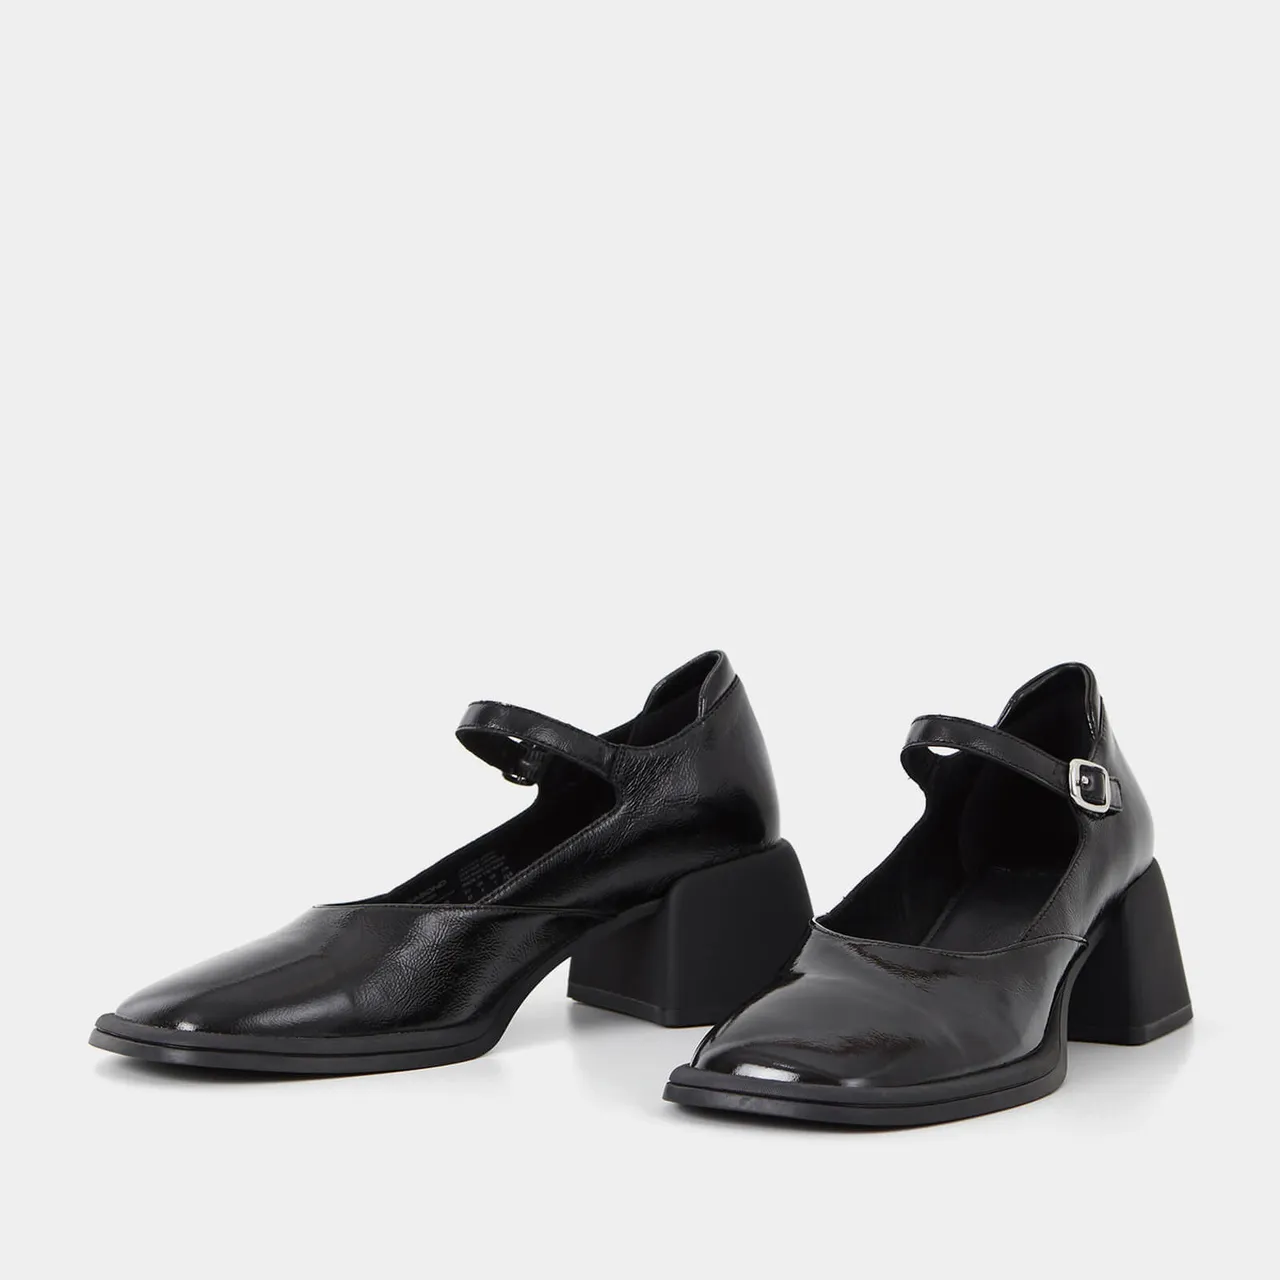 Vagabond Ansie Patent Leather Mary Jane Shoes - UK